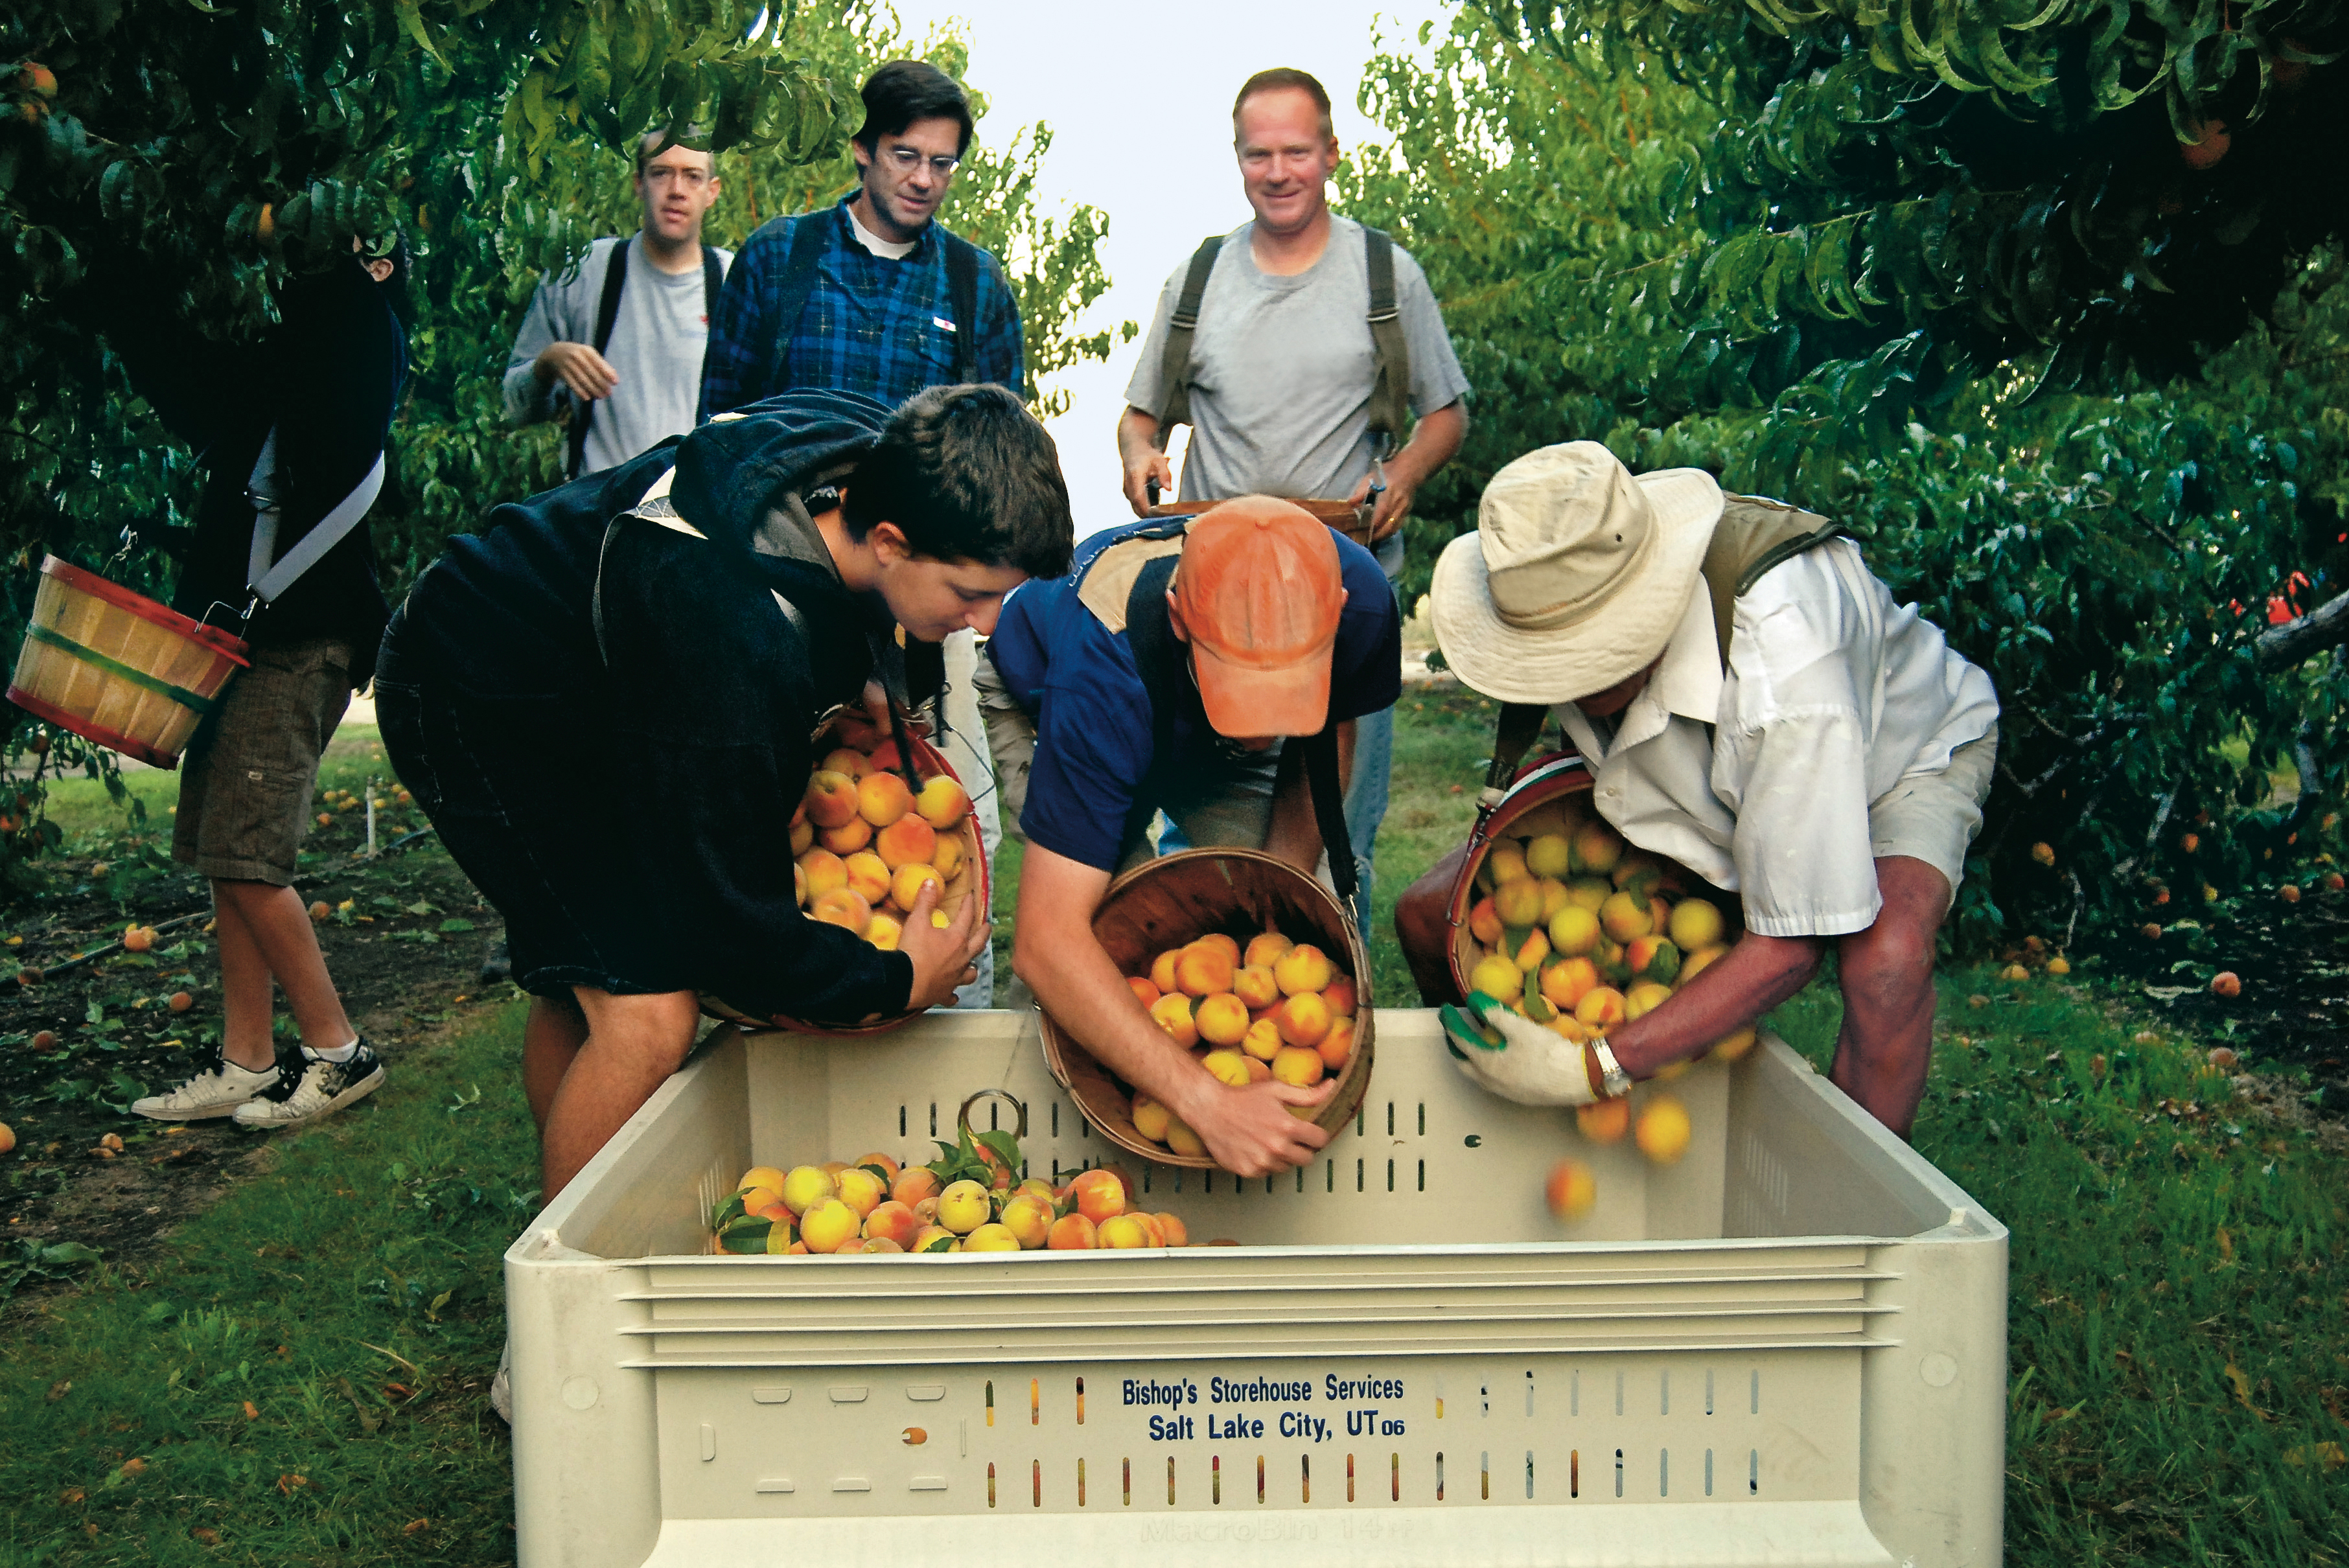 Men and young men pouring peaches from picking baskets into a square tan bin inside an orchard.